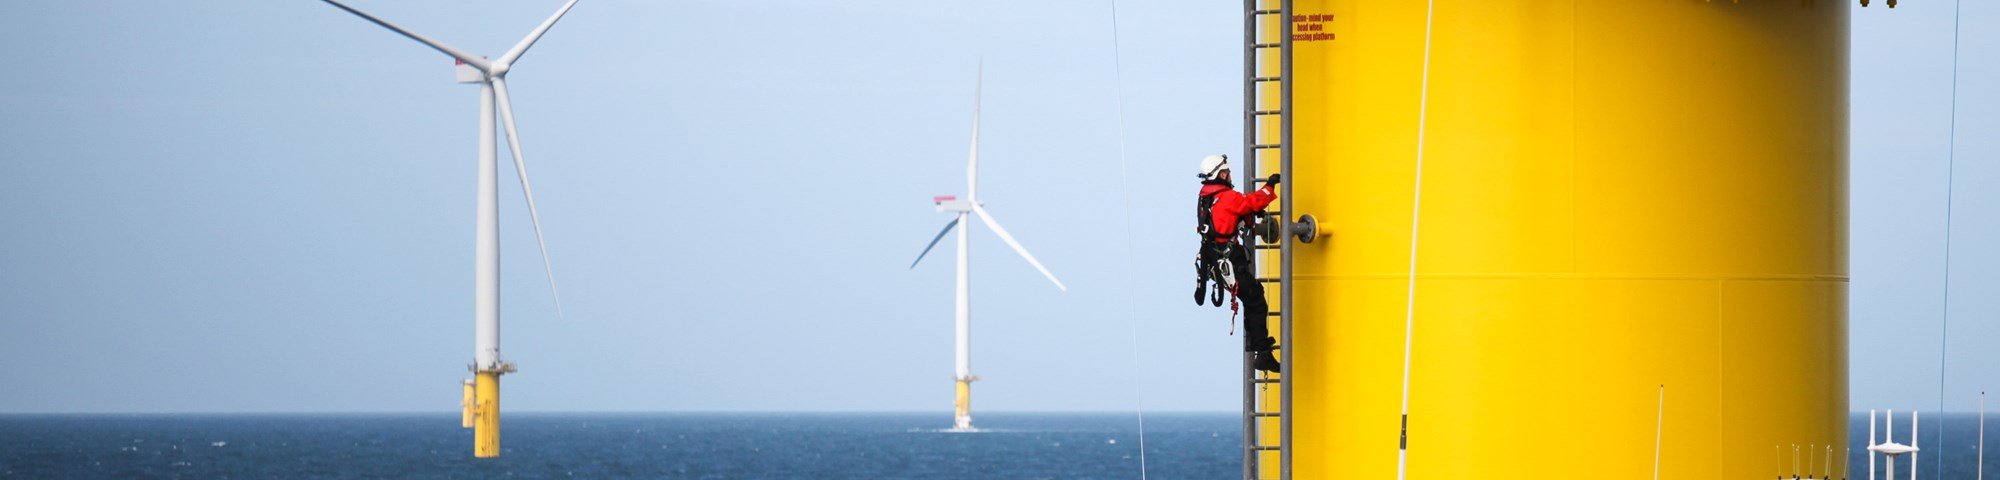 Crew transfer on an offshore wind farm. © Licensed to Spectrum Offshore